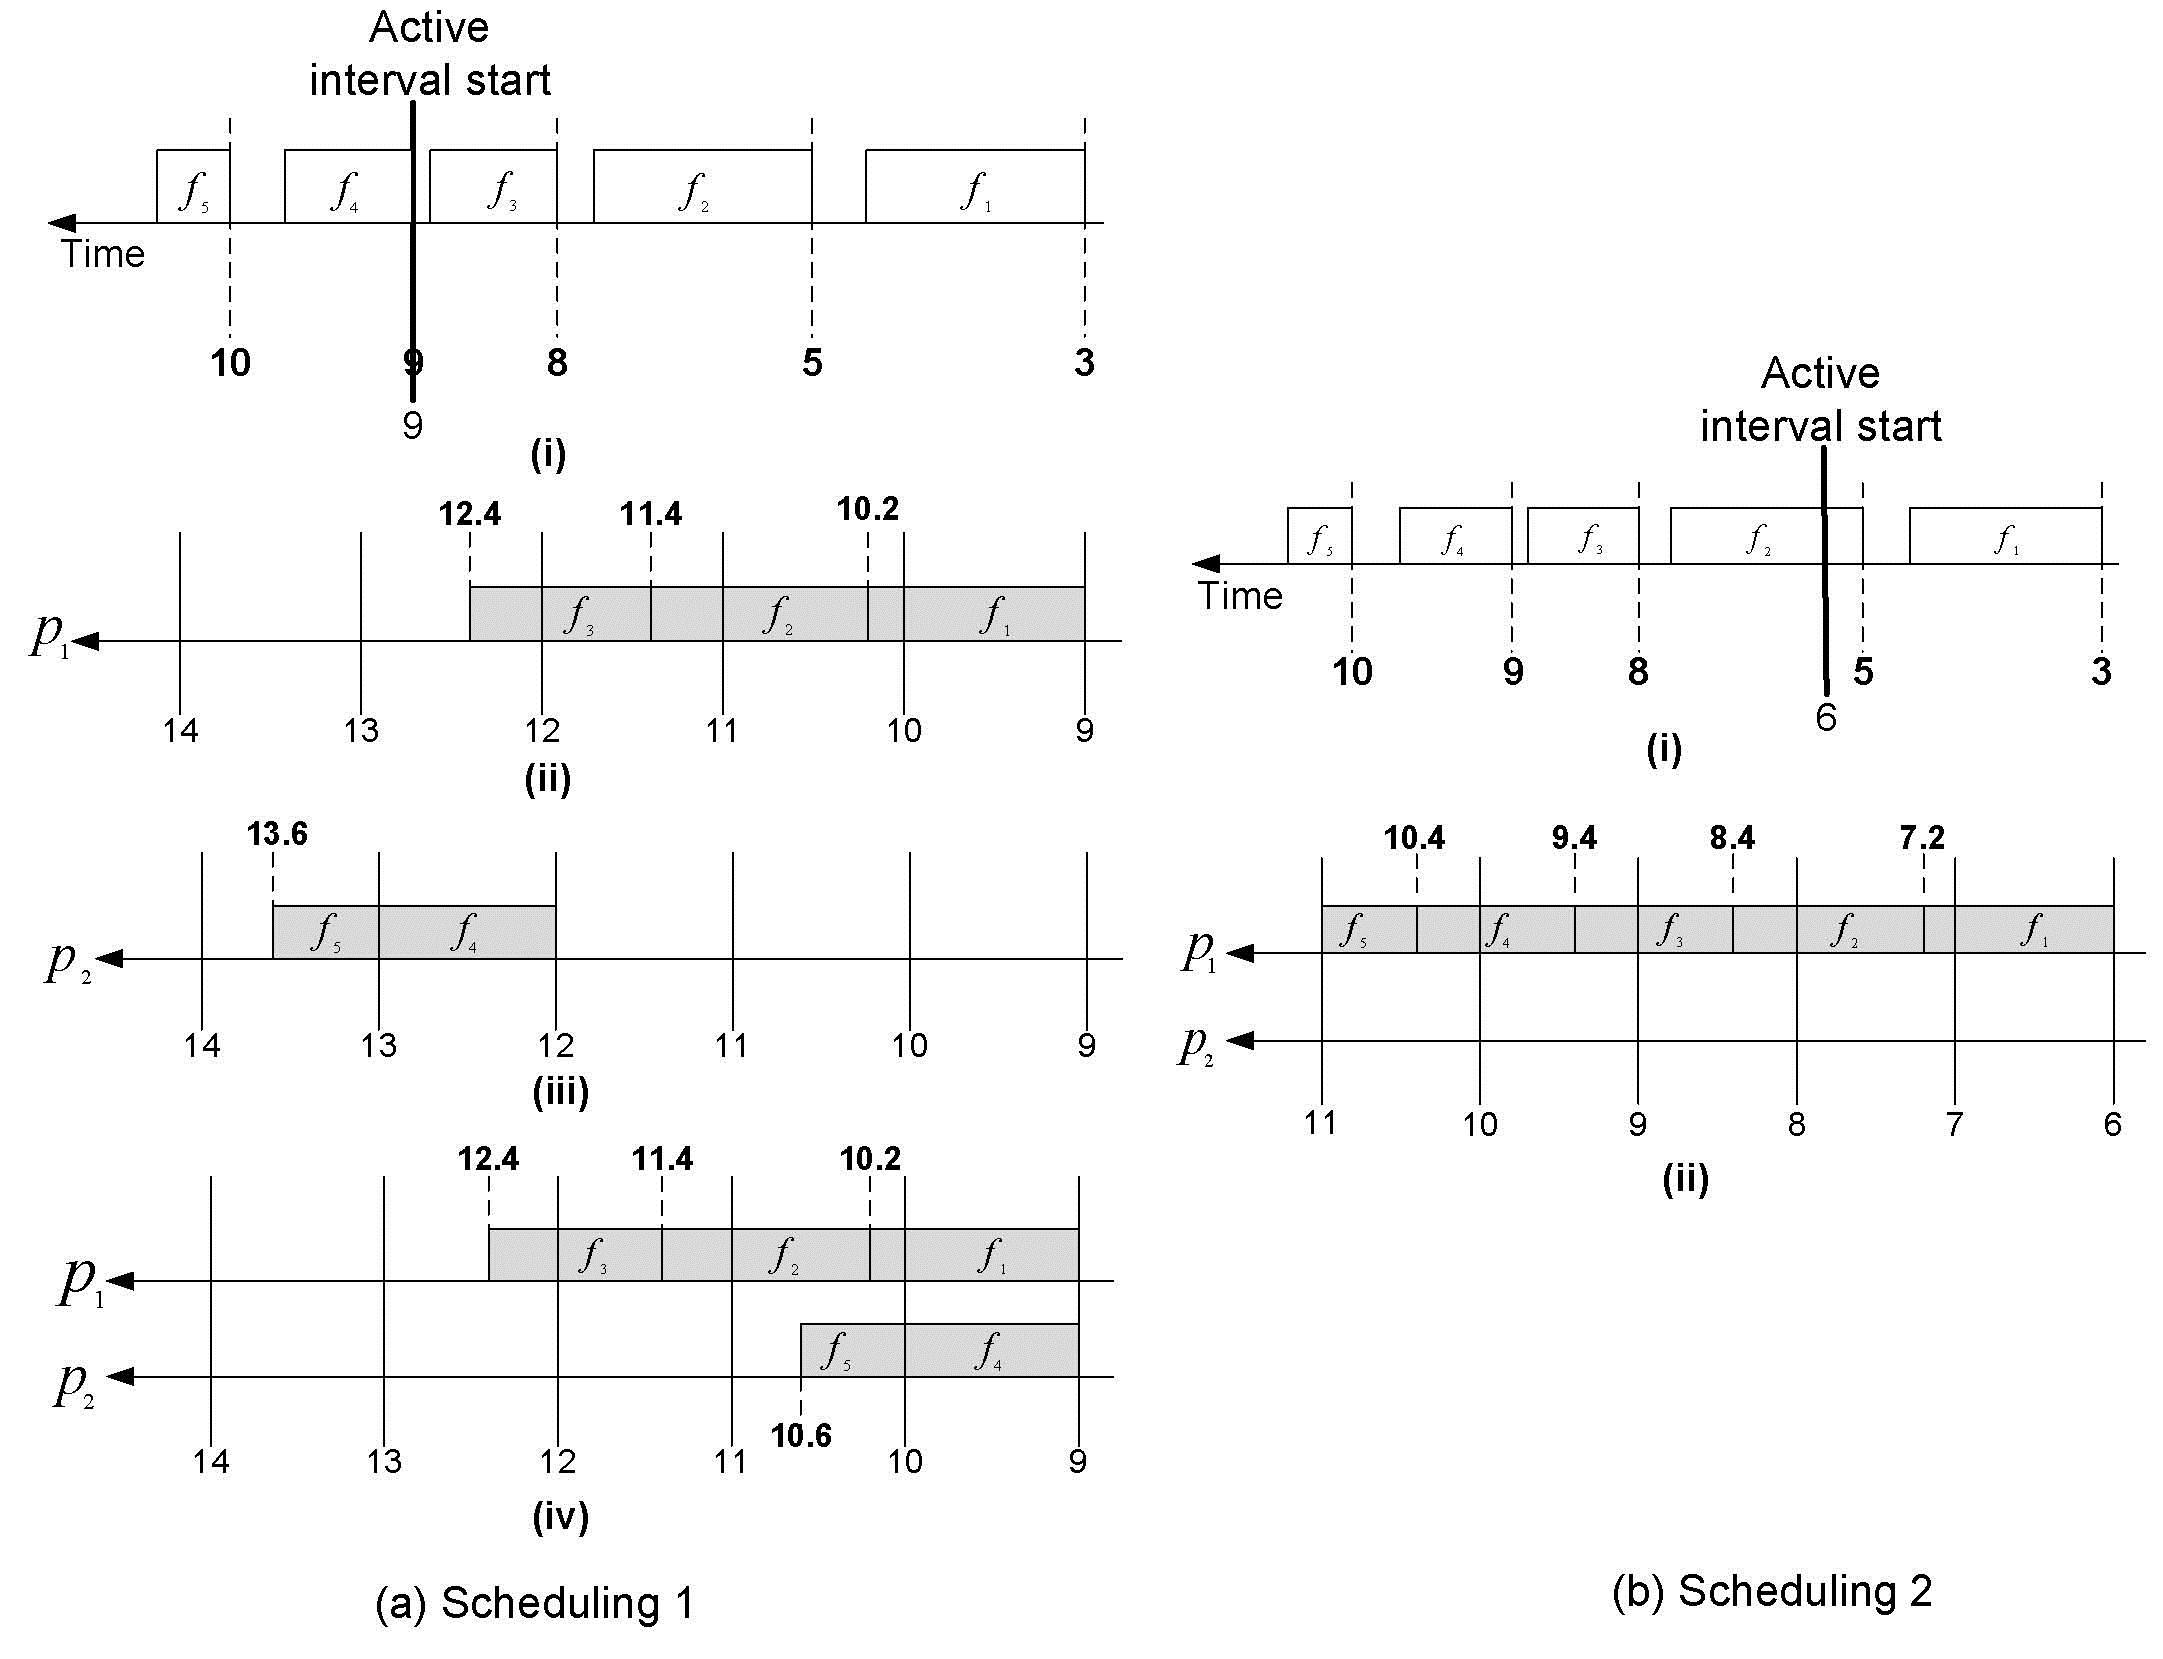 Fig. 2. Alternative schedules for given frames